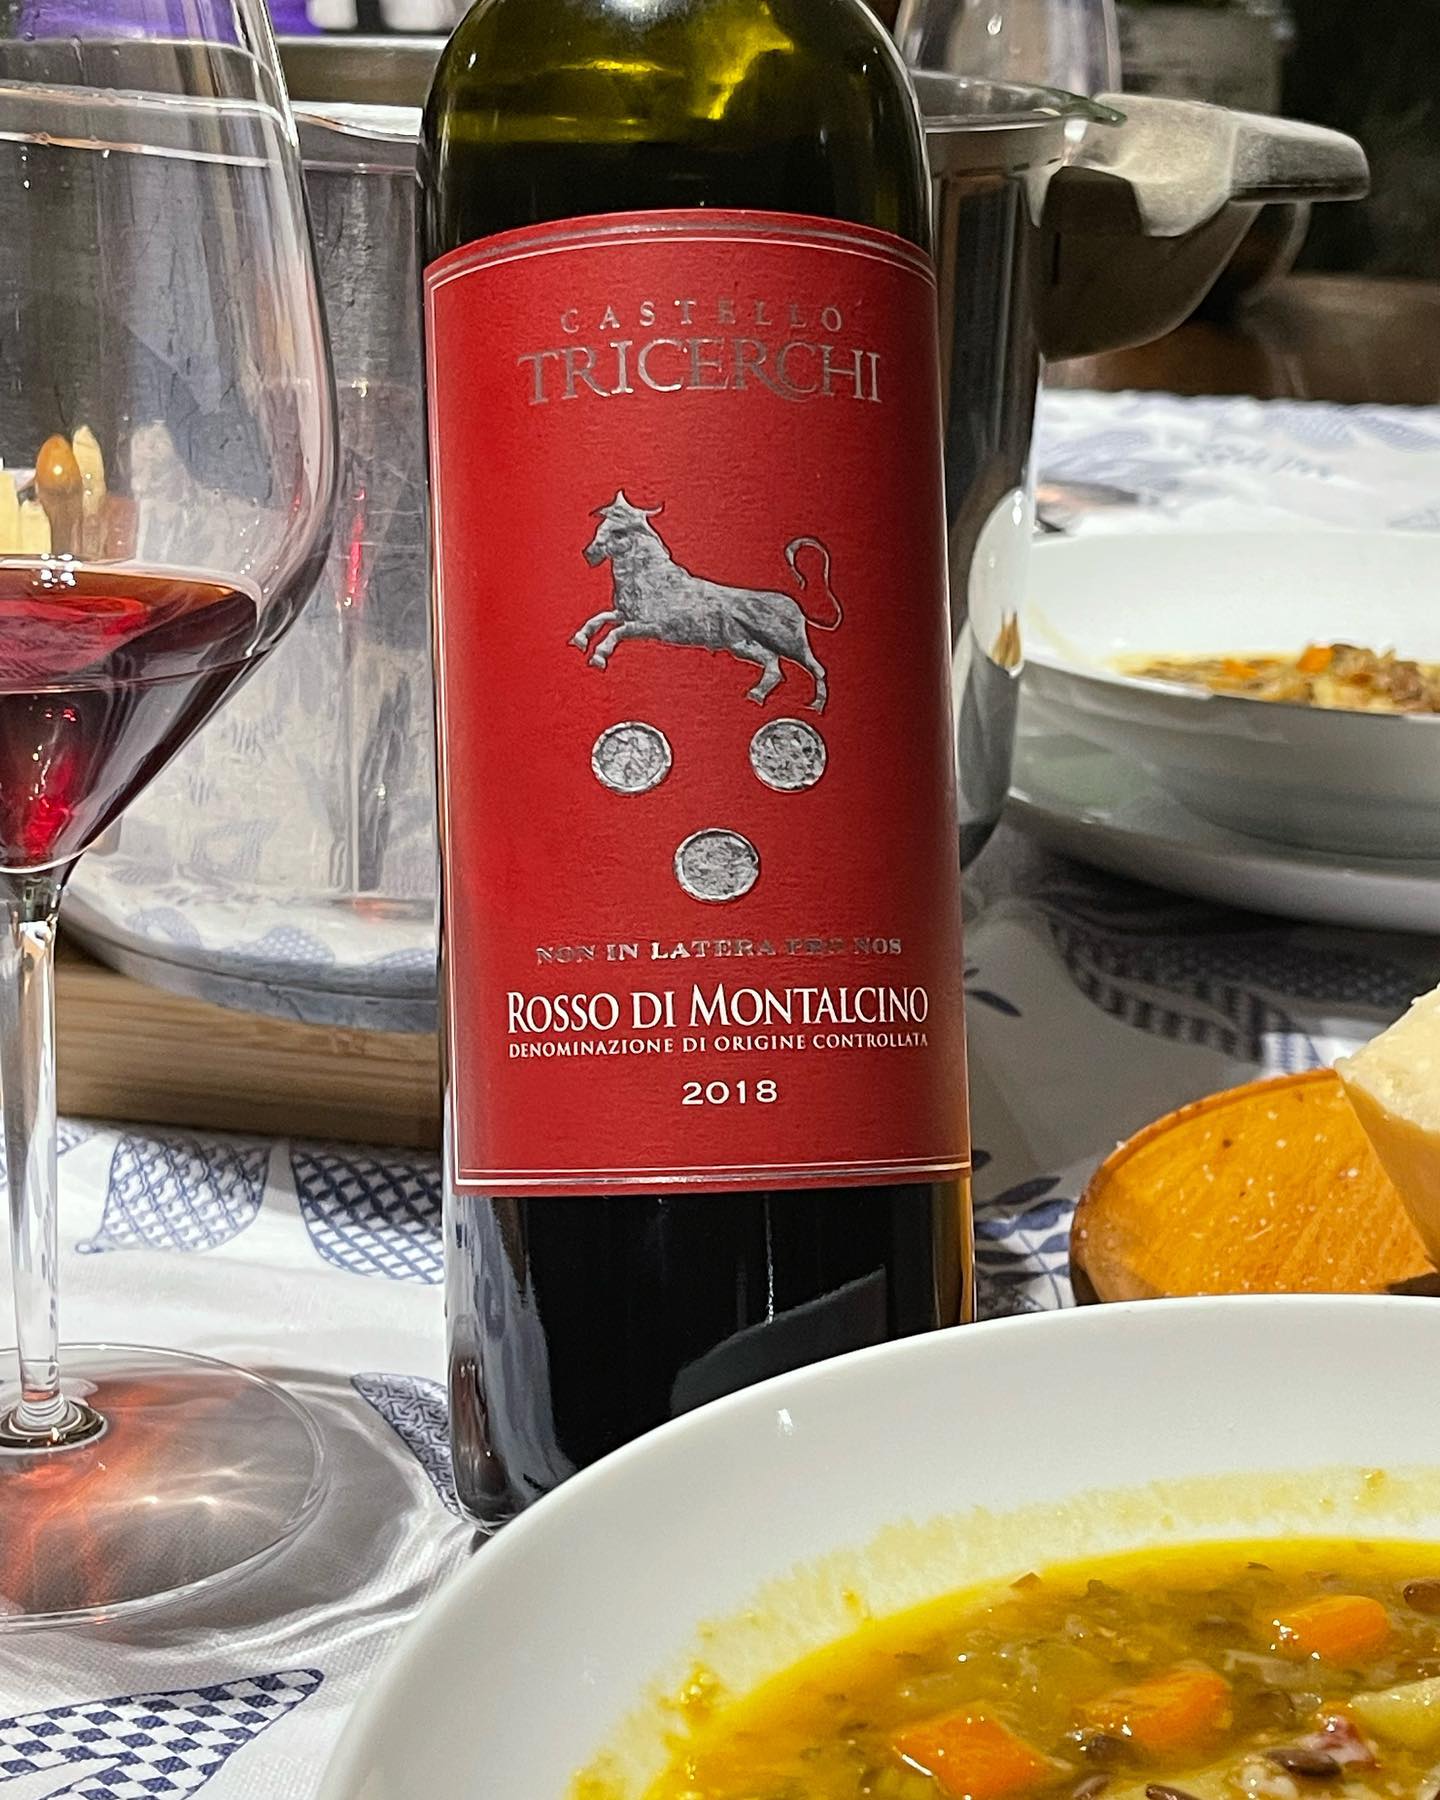 Elegant Rosso di Montalcino from Tommaso of @castellotricerchi .
He is living in the family castle built in 1441 by his family.
Talking about history!
#toscana #italianwine #redwine #sangiovese #foodandwine